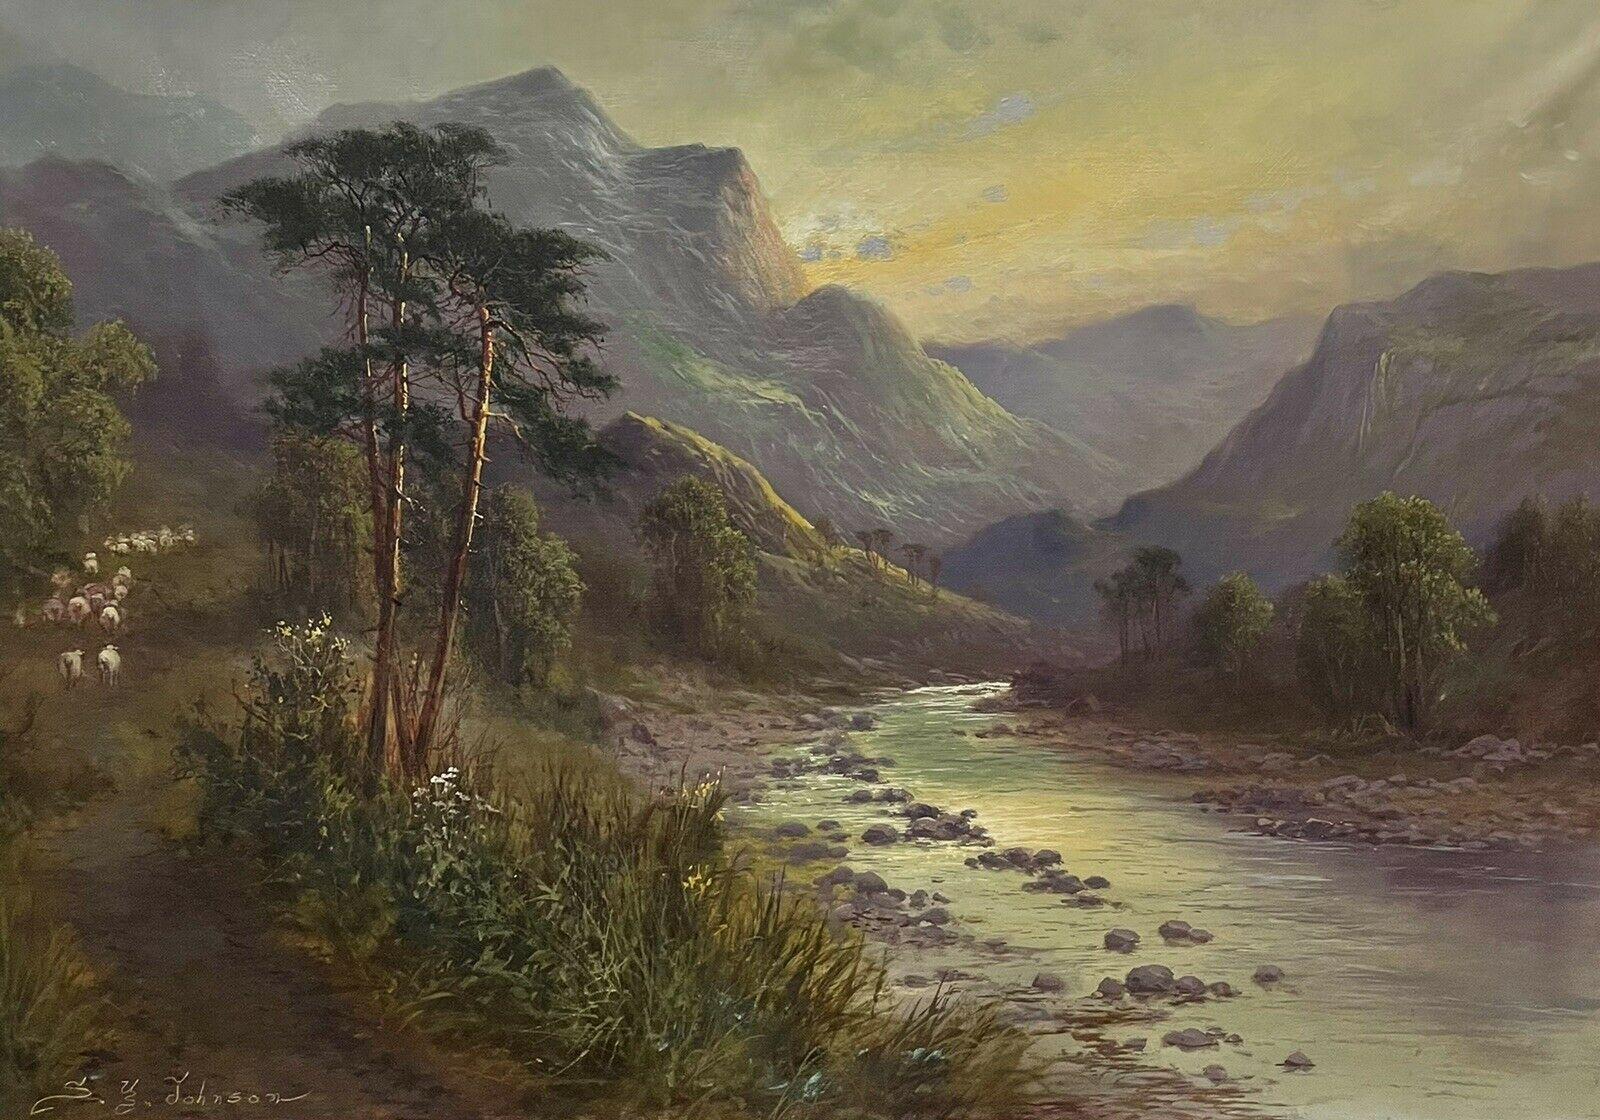 Sidney Yates Johnson Landscape Painting - Large Antique Scottish Highland Landscape Oil Painting Sheep in River Valley